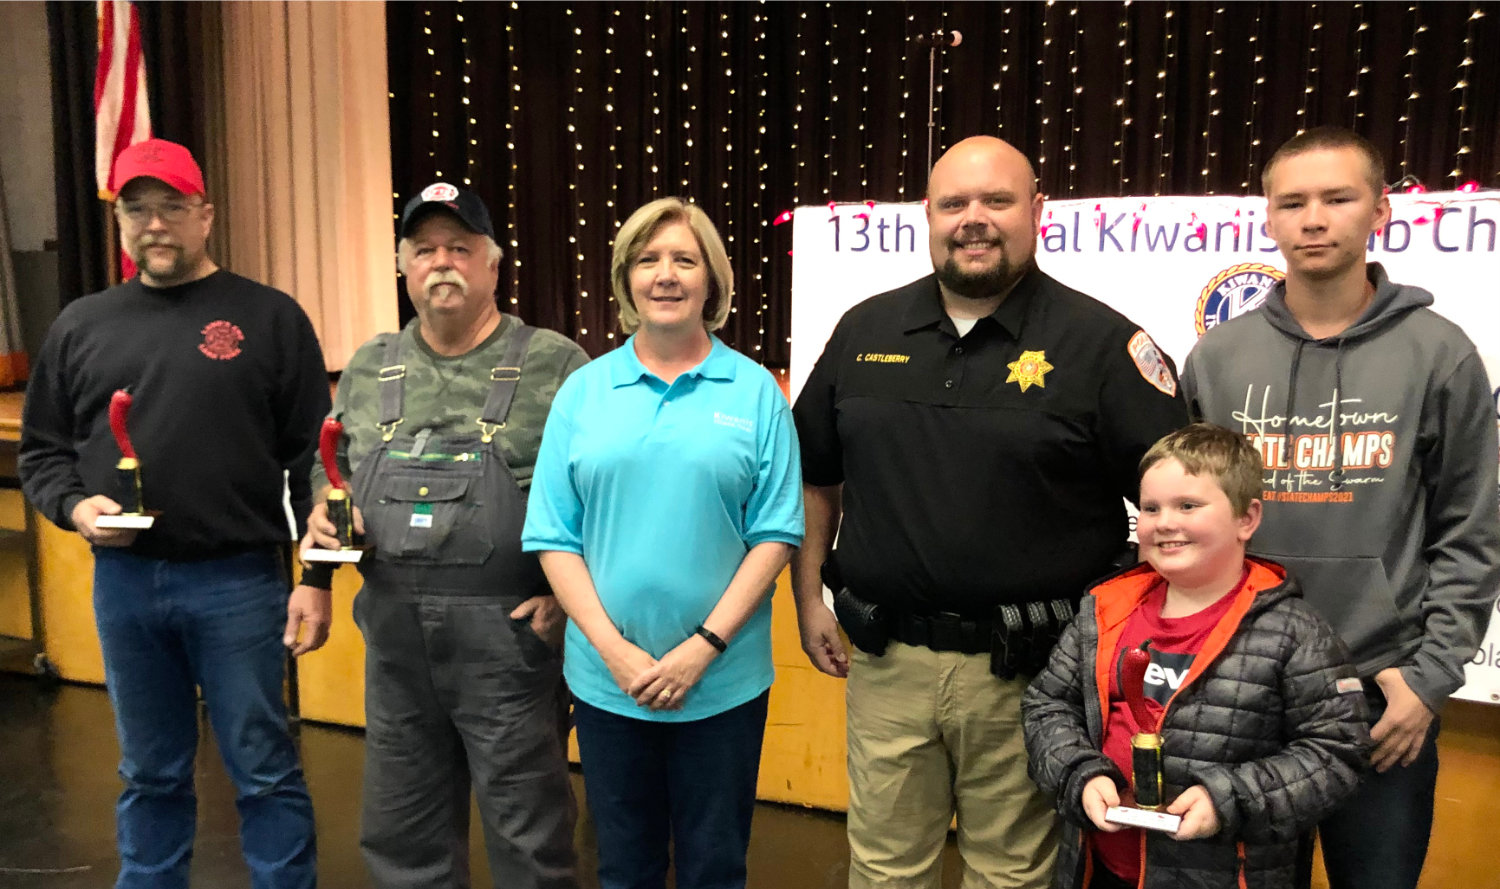 Winners in the Mineola Kiwanis First Responders Chili Cook Off were the Lands End fire department for People’s Choice and Best Decorated Booth, and the Mineola ISD Police Department was the Best Chili winner. Kiwanis President Becky Moore presented the awards.